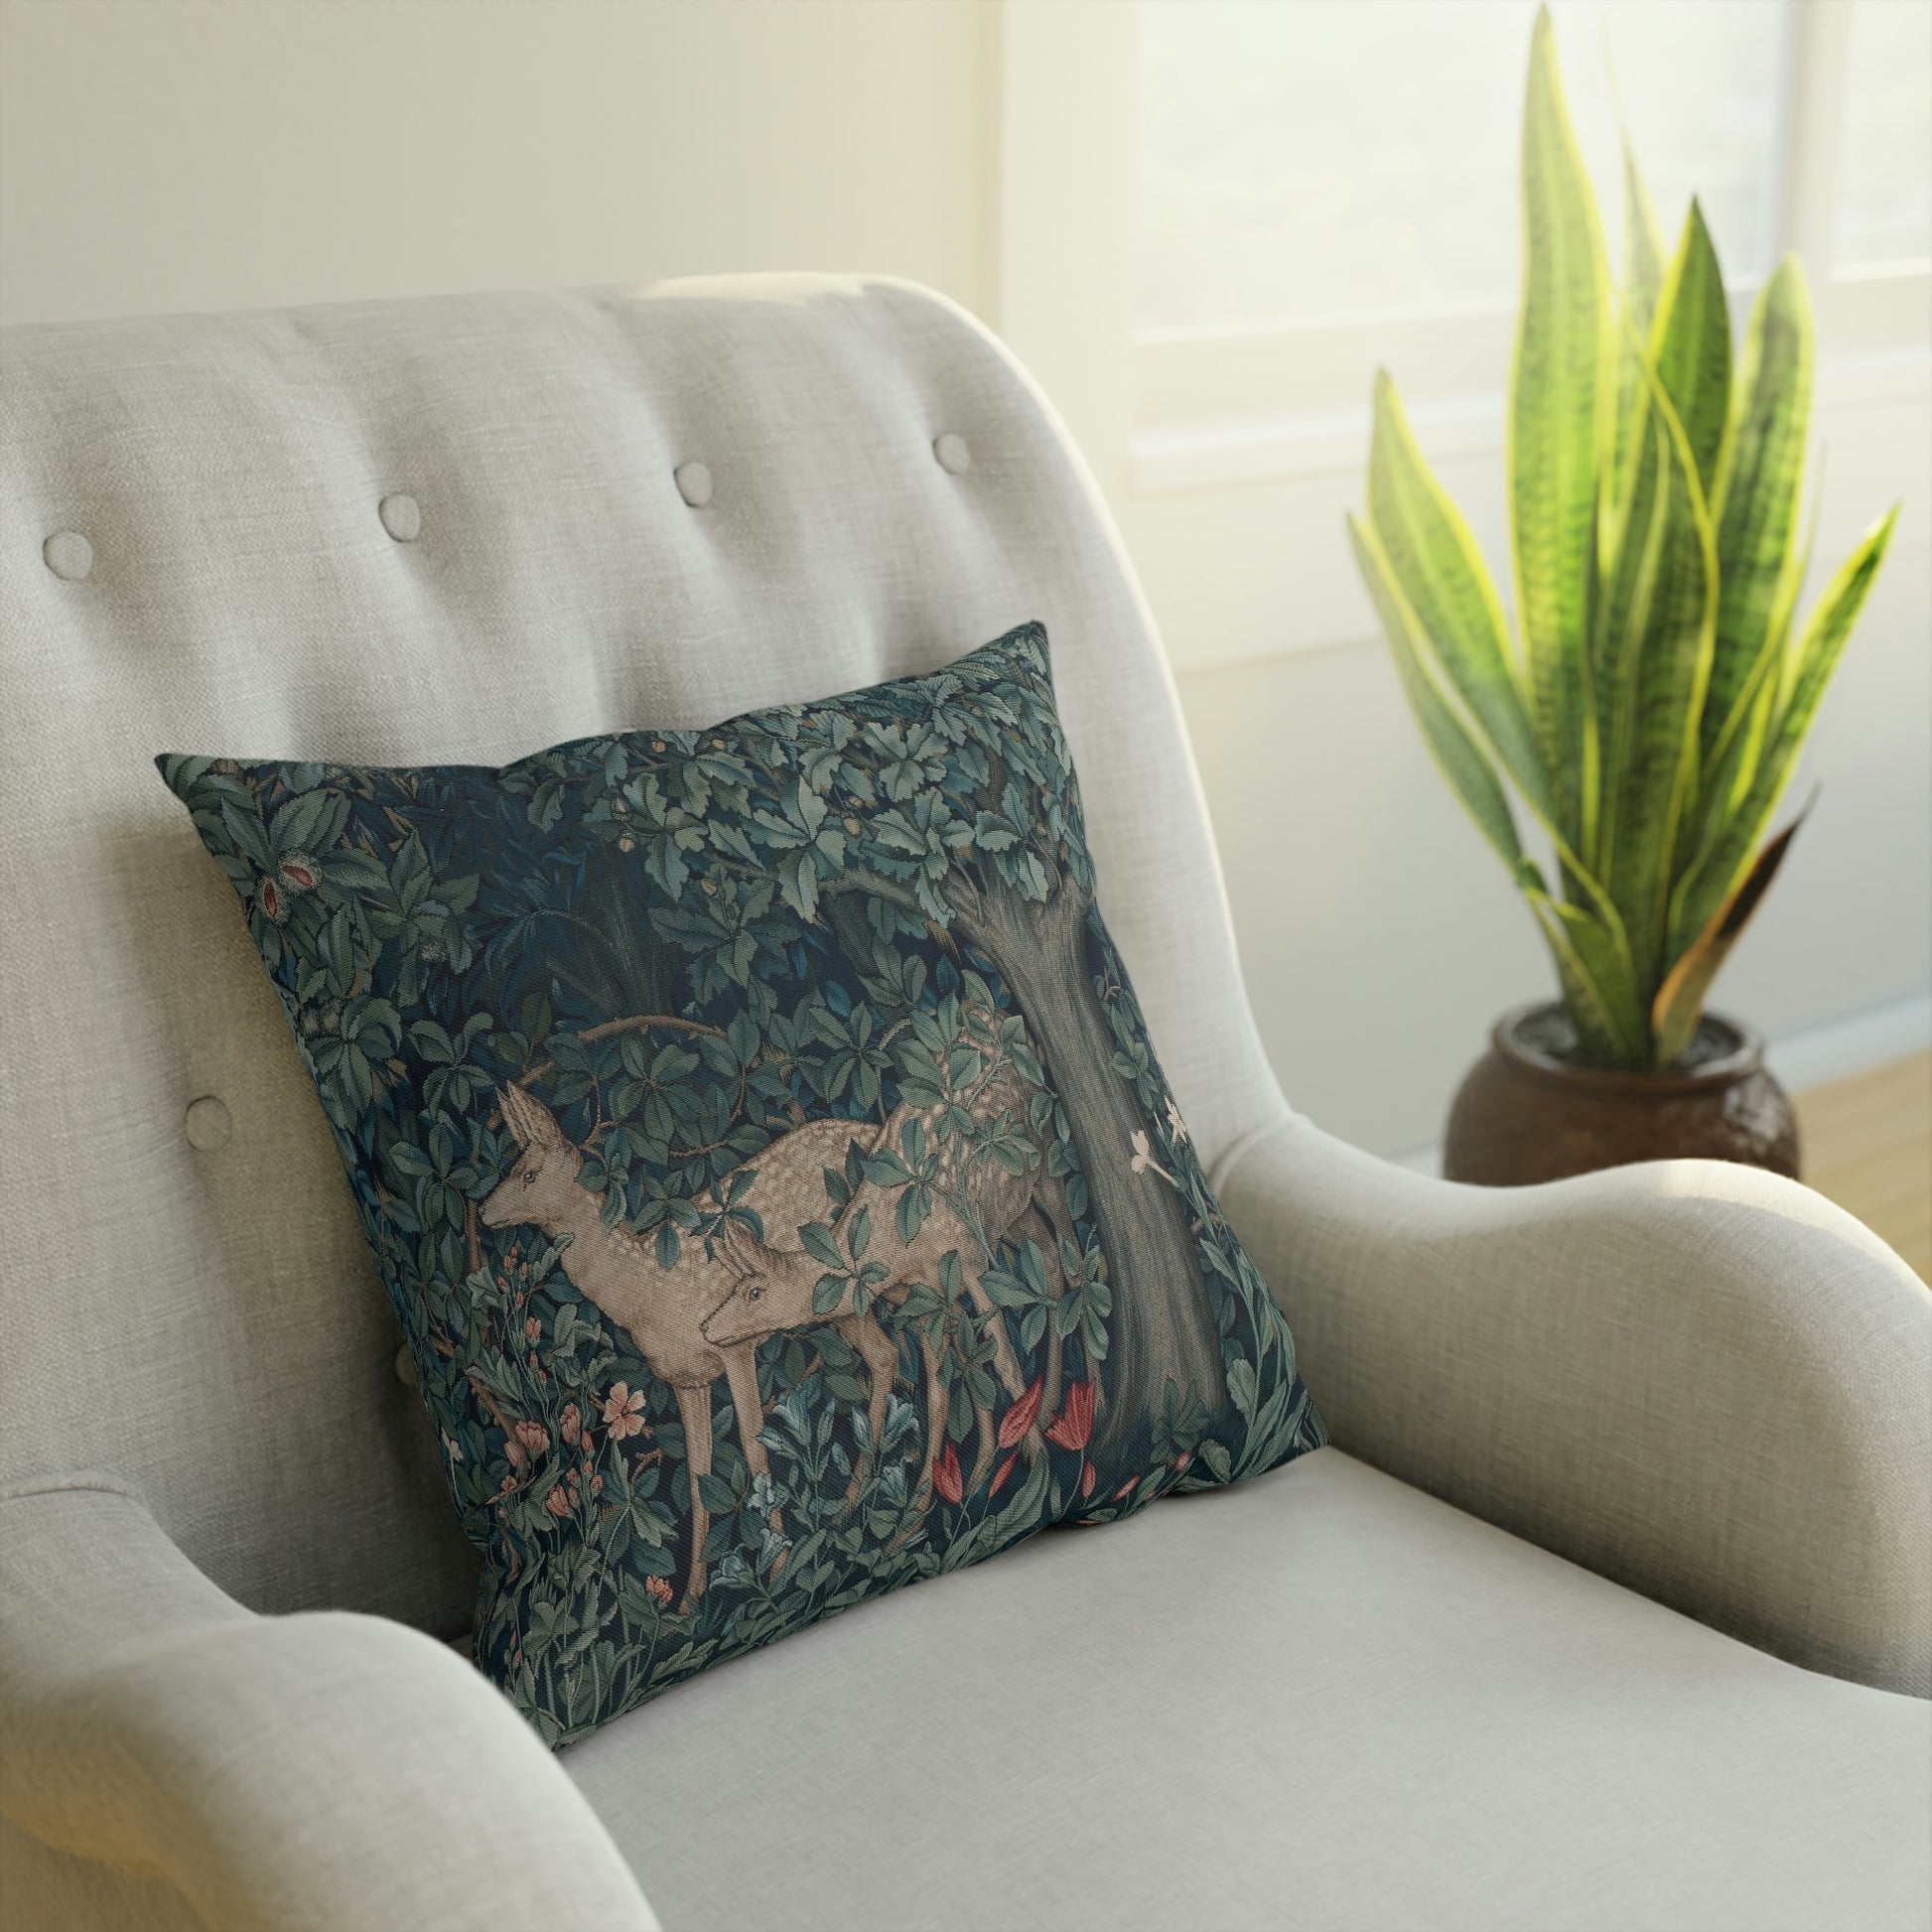 William-Morris-and-Co-Cushion-and-Cushion-Cover-Dear-by-John-Henry-Dearle-Green-Forest-Collection-4